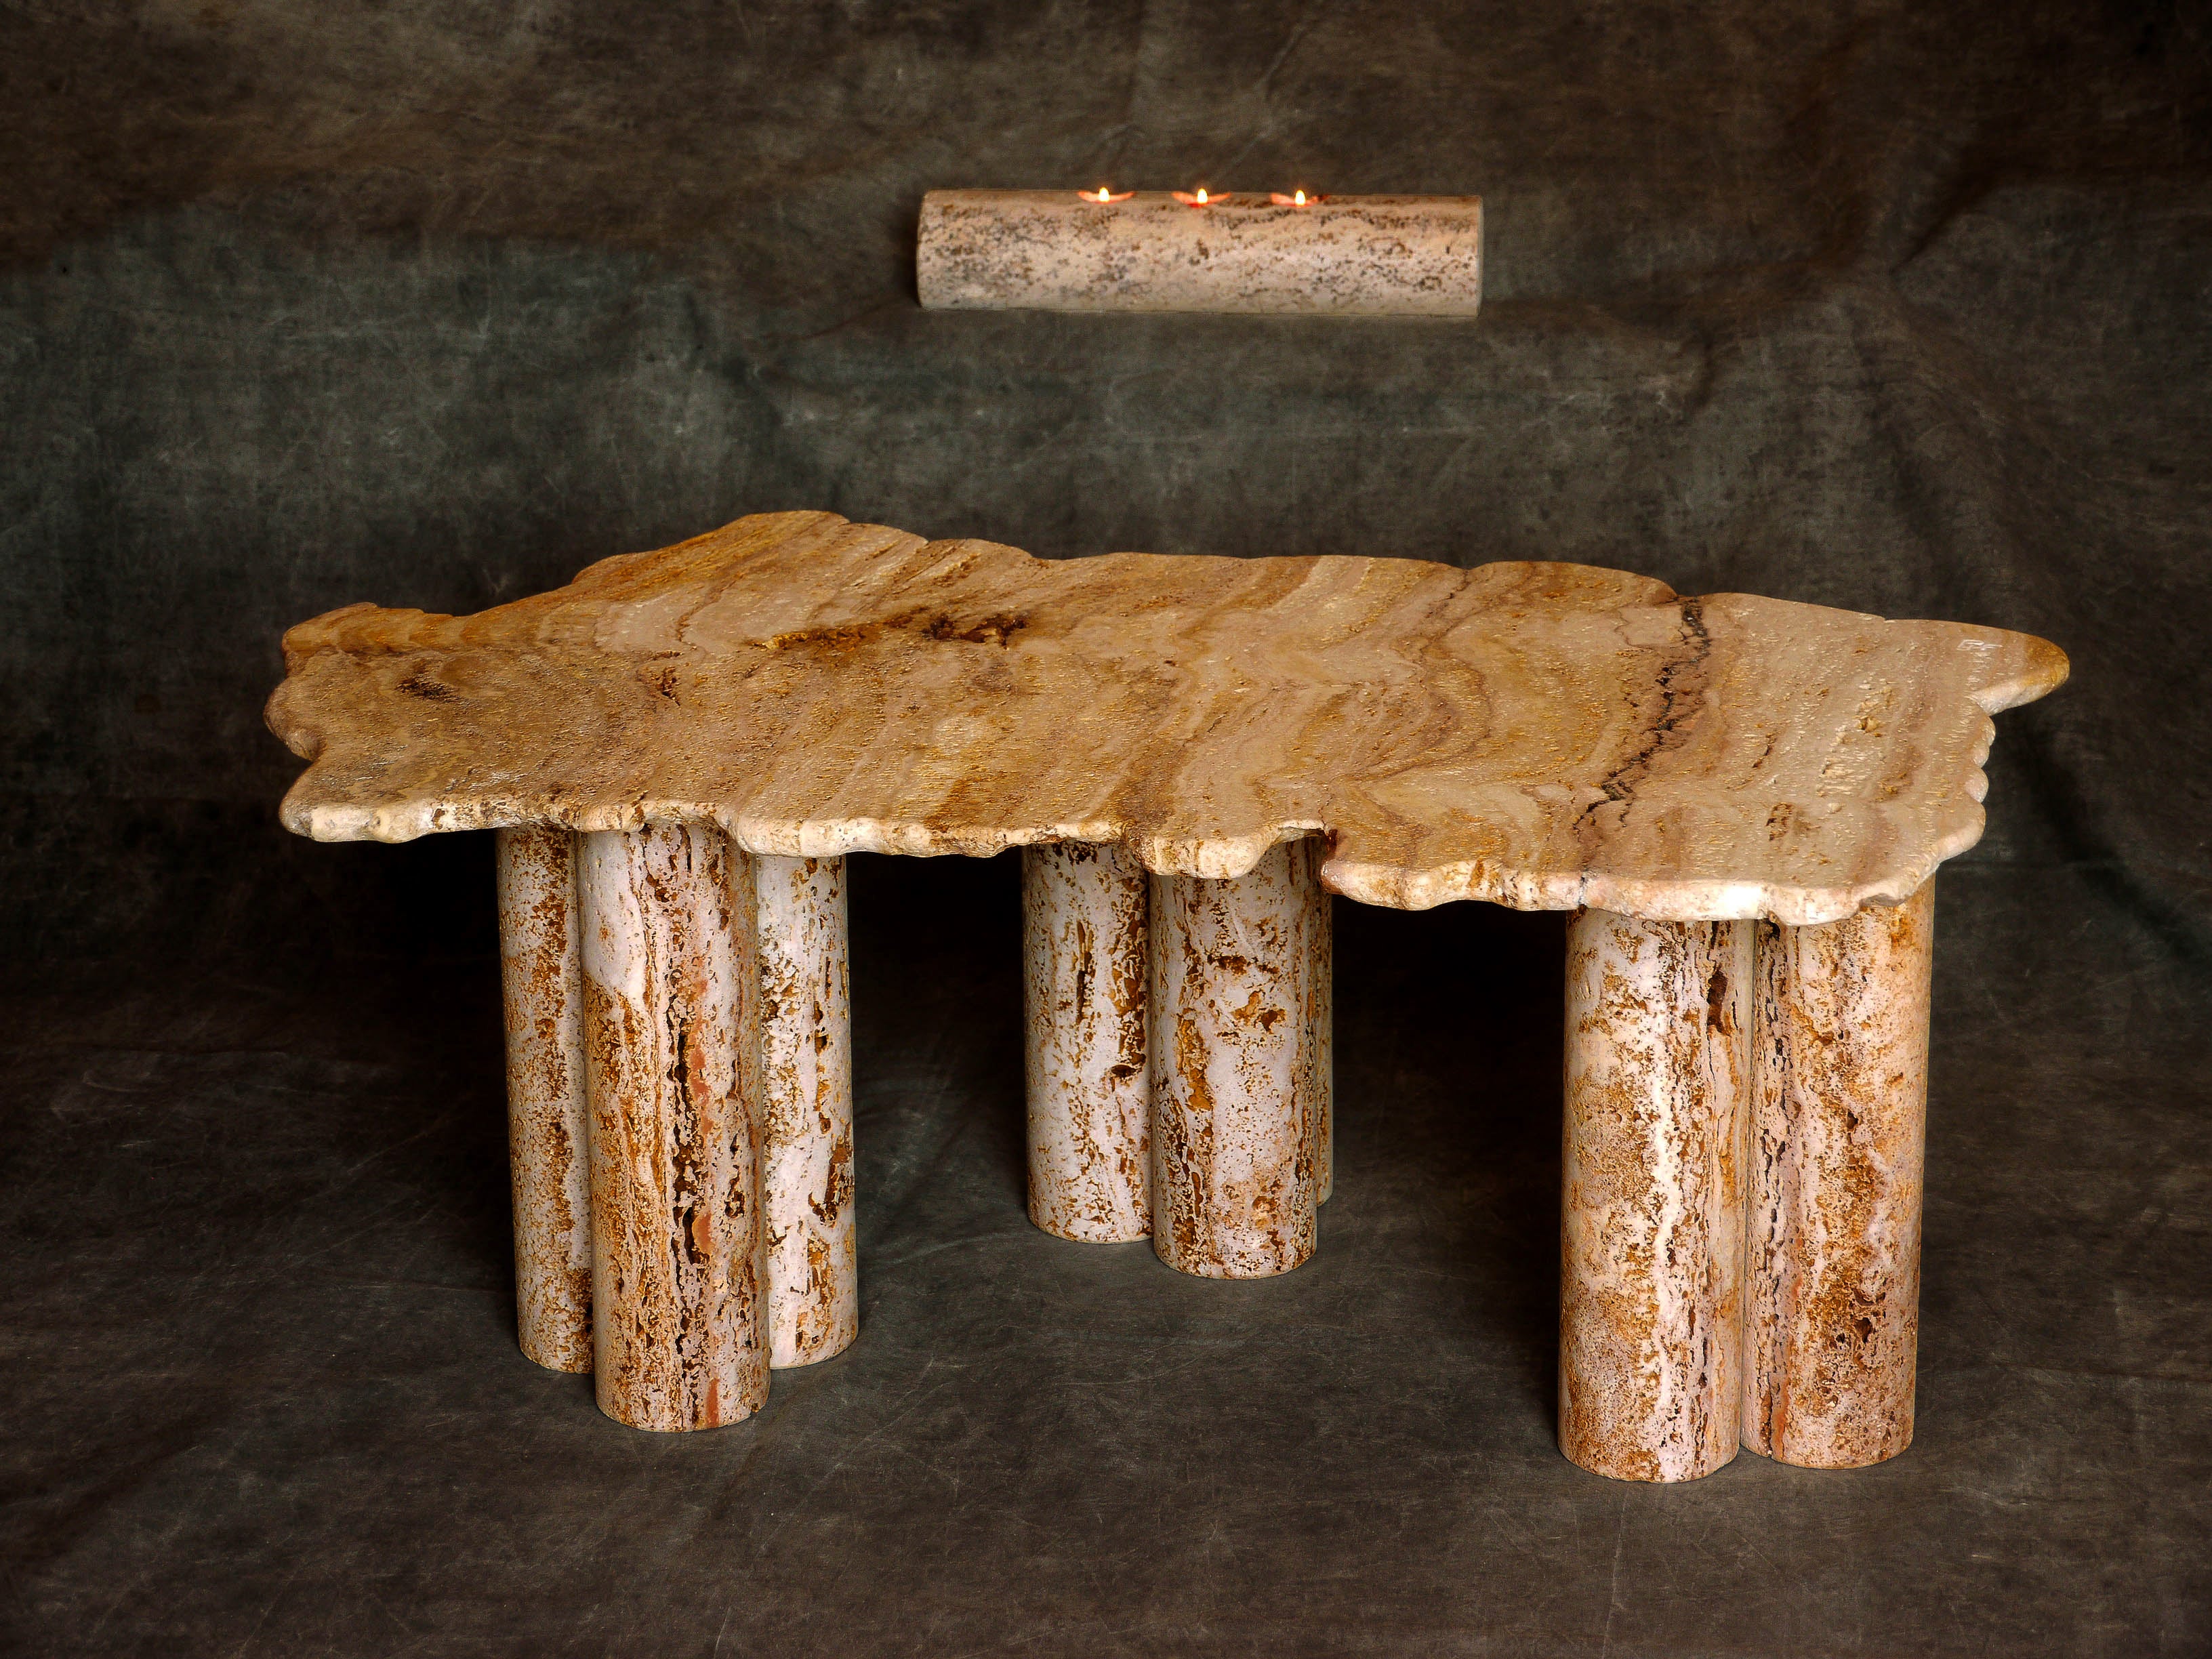 Flynn Stone coffee table by Jean-Fréderic Bourdier
Dimensions: D 99 x W 66 x H 37 cm
Materials: Travertine.

Mostly guided by his sculptor skills JFB and his life time strong attraction for nature, has started out this collection in 2021 as he